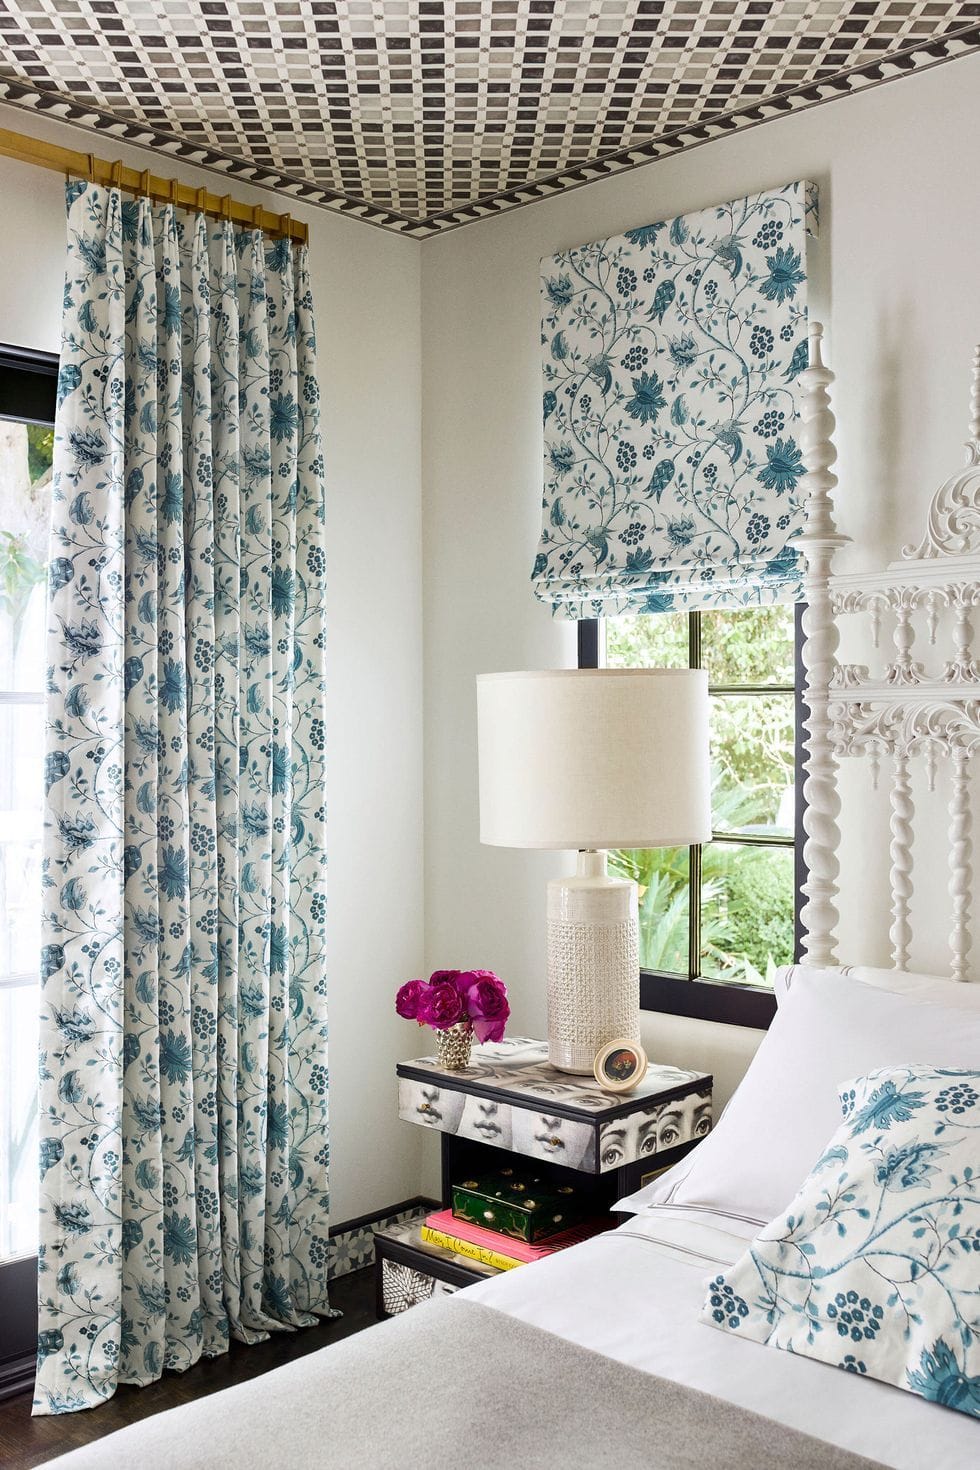 Patterned curtains and bedding in this bedroom help give it a vibrant contemporary flair.